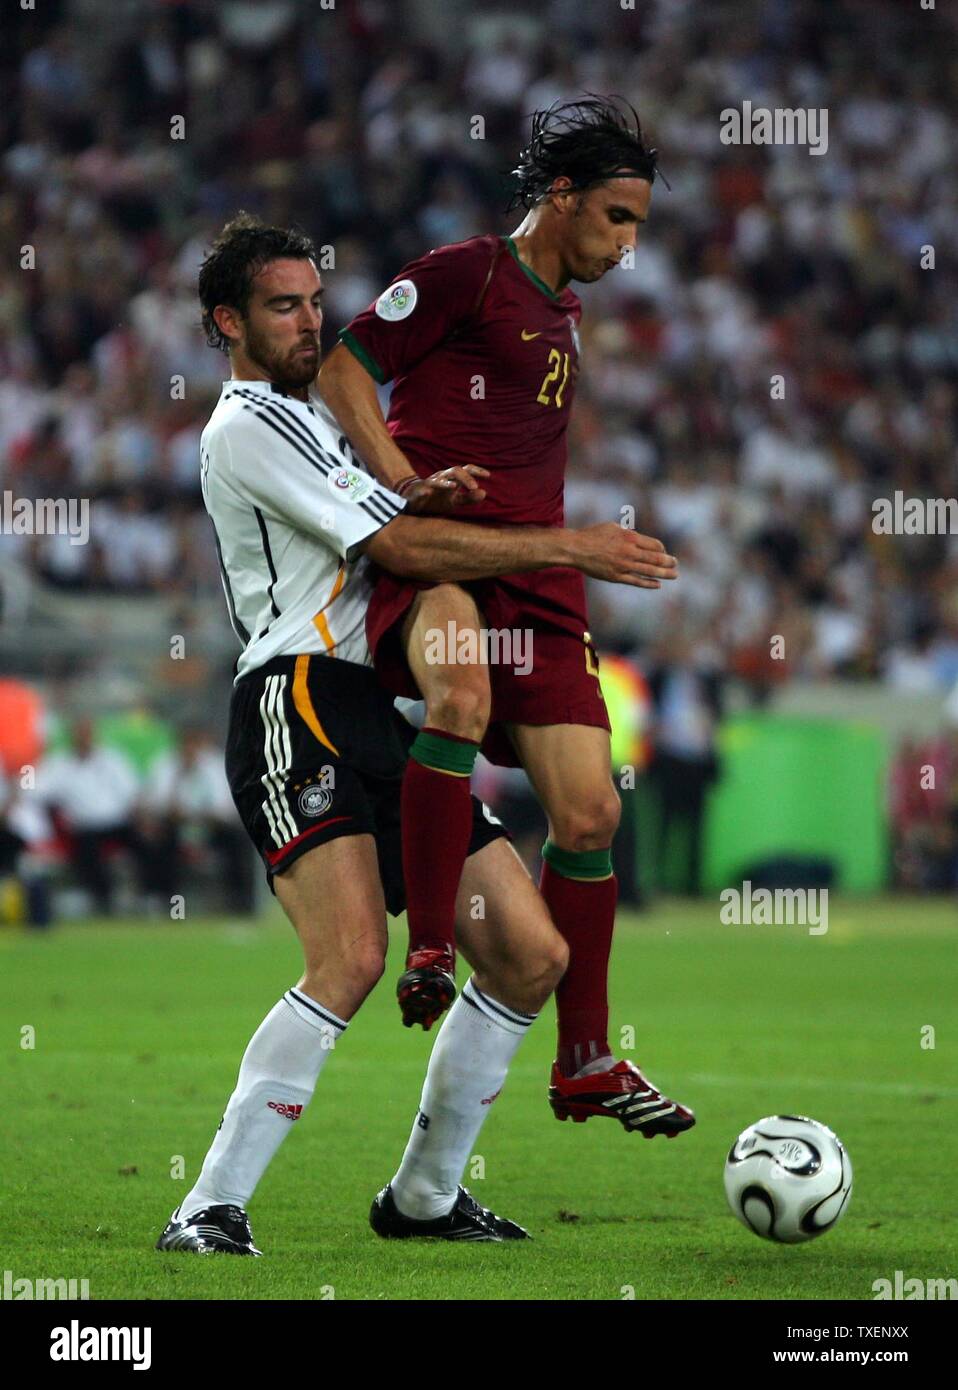 Germany's Christoph Metzelder (L) and Portugal's Nuno Gomes fight for the ball in 2006 FIFA World Cup soccer in Stuttgart, Germany on July 8, 2006. Germany defeated Portugal 3-1 to capture third place in the World Cup.  (UPI Photo/Christian Brunskill) Stock Photo